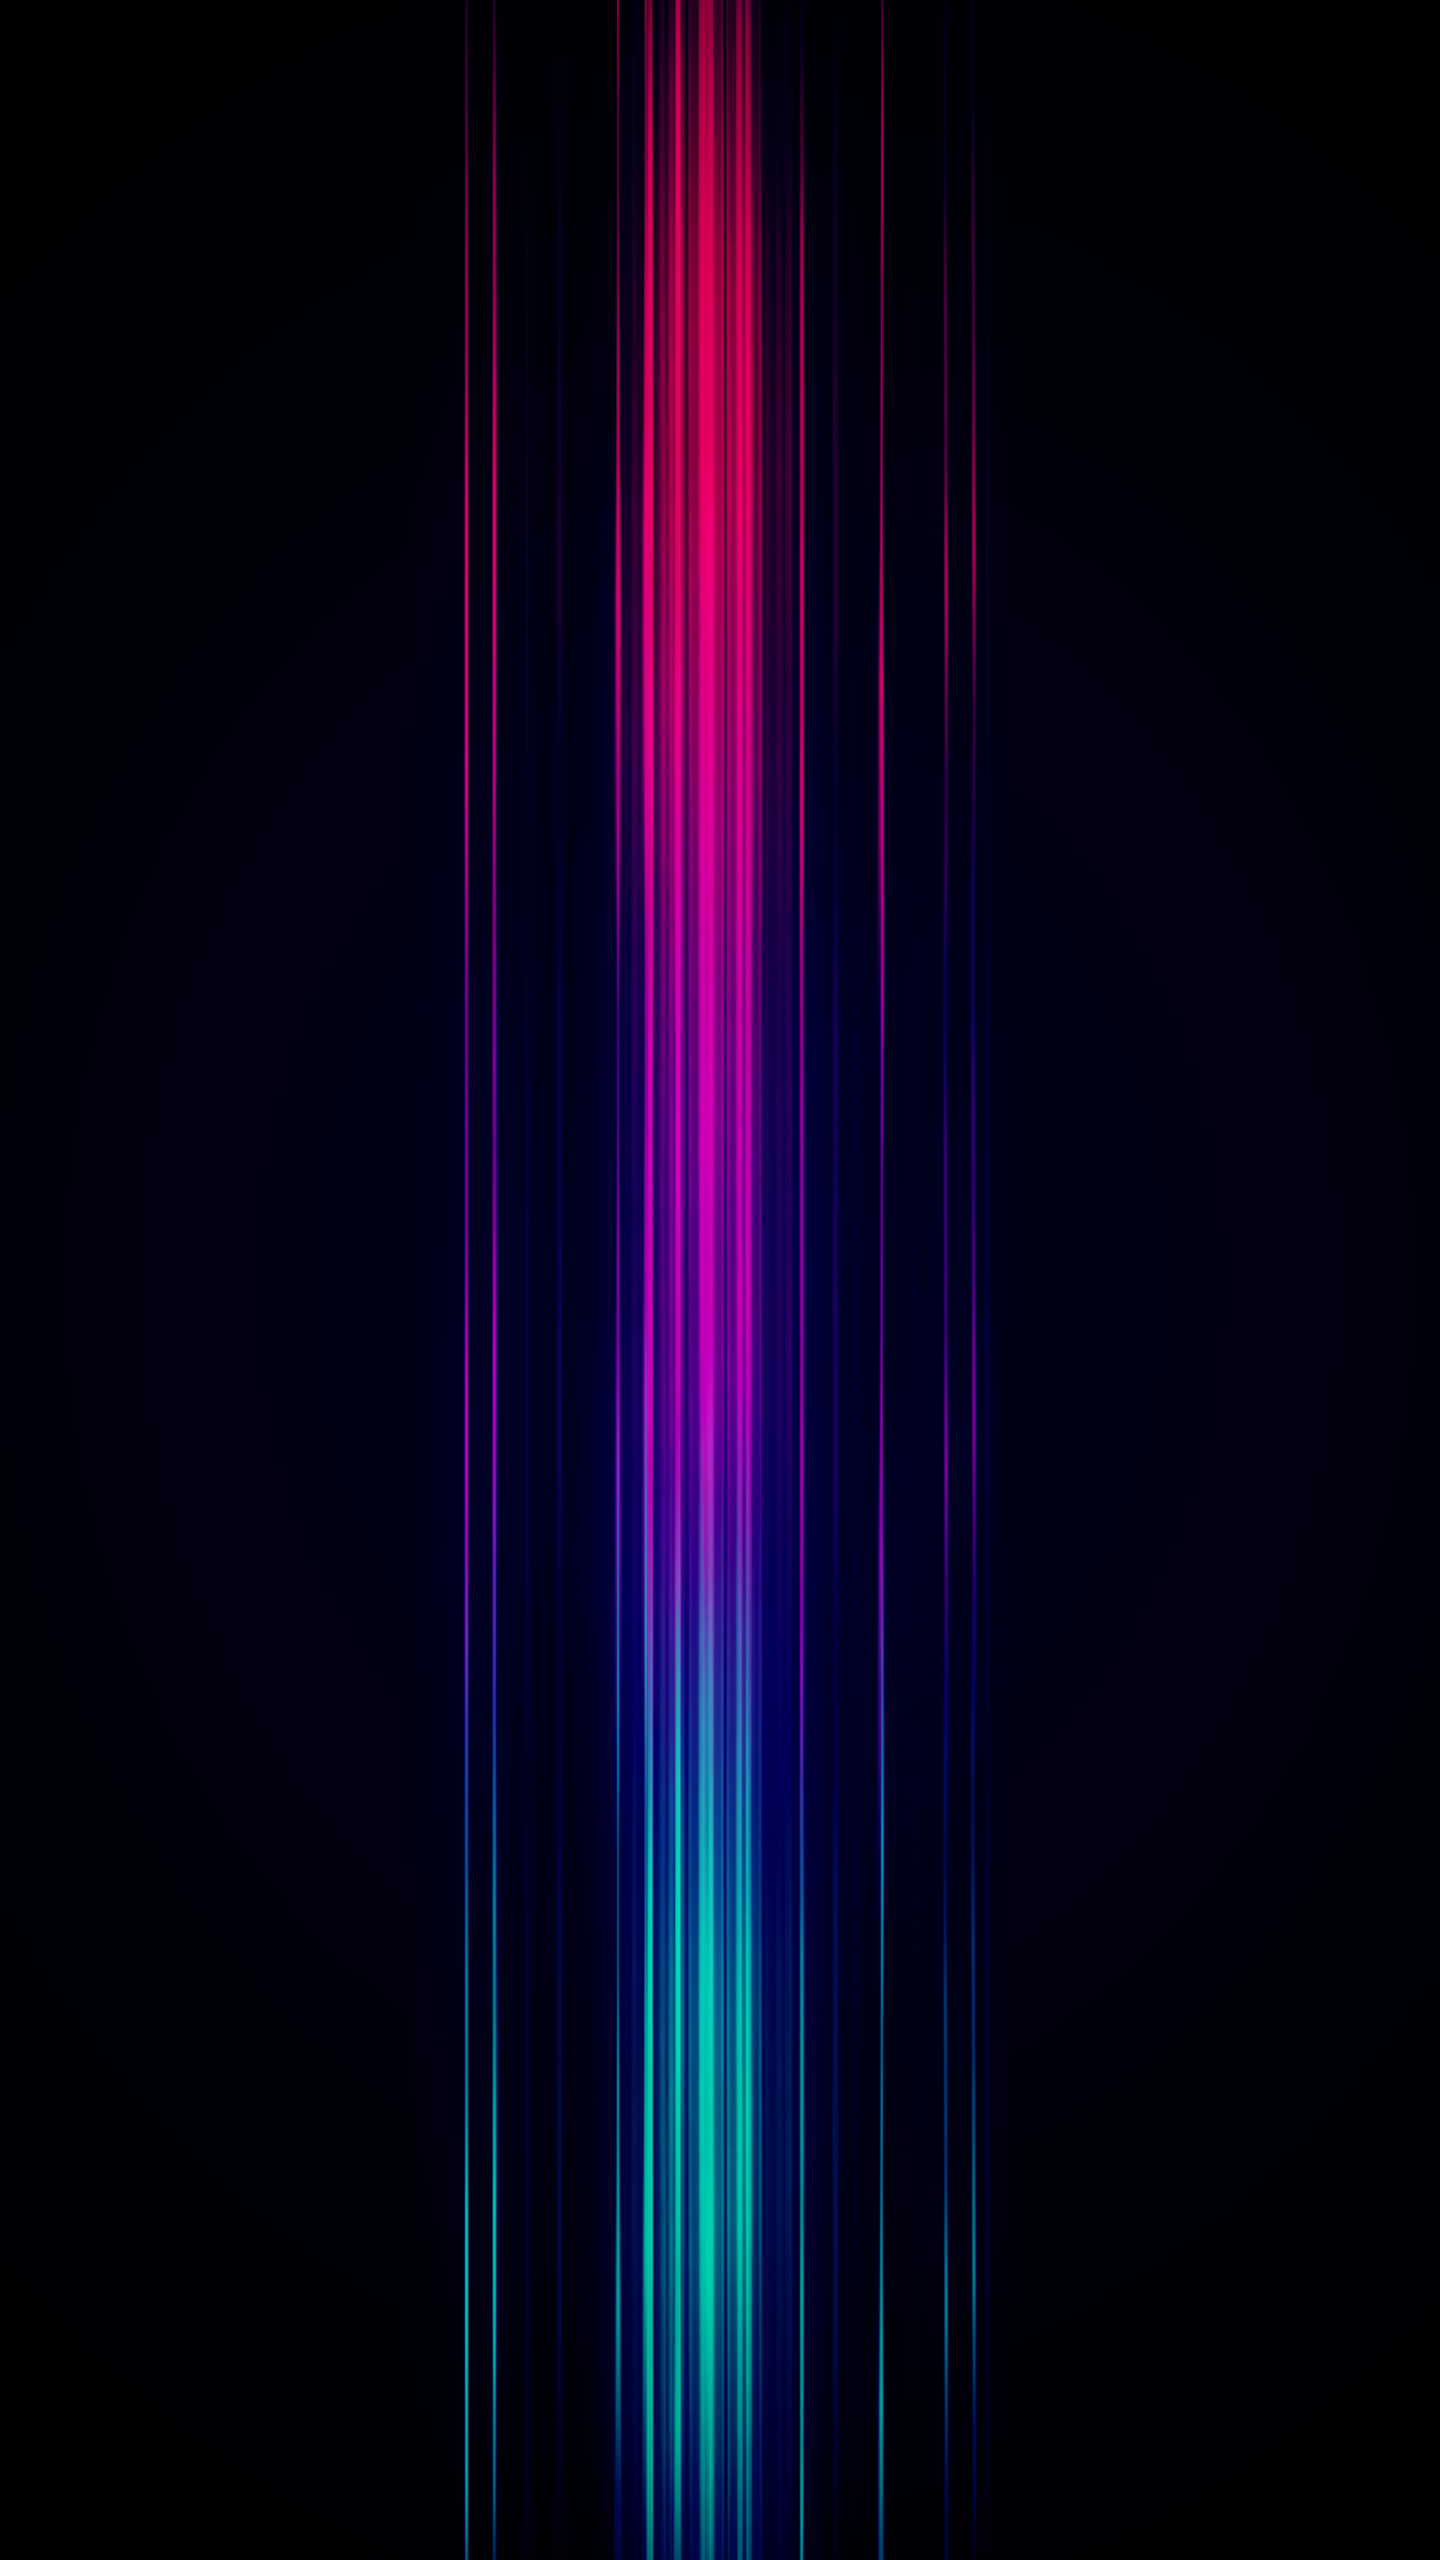 iOS 14 wallpaper gradient inspirations for iPhone and iPad | Iphone  wallpaper gradient, Ios 14 wallpaper, Ombre wallpaper iphone